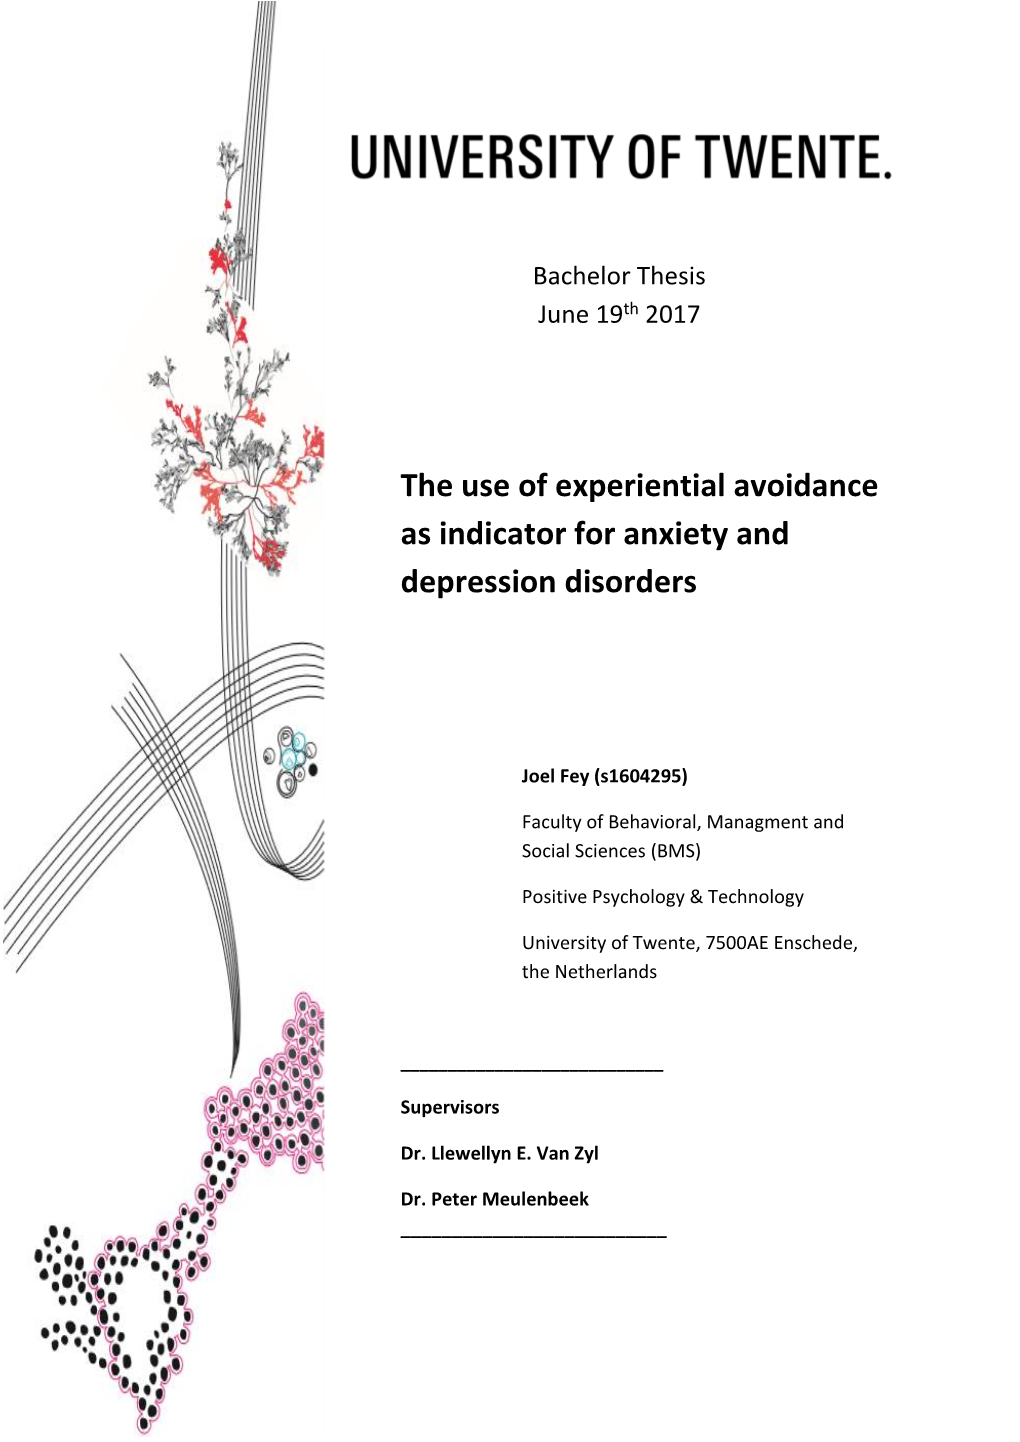 The Use of Experiential Avoidance As Indicator for Anxiety and Depression Disorders